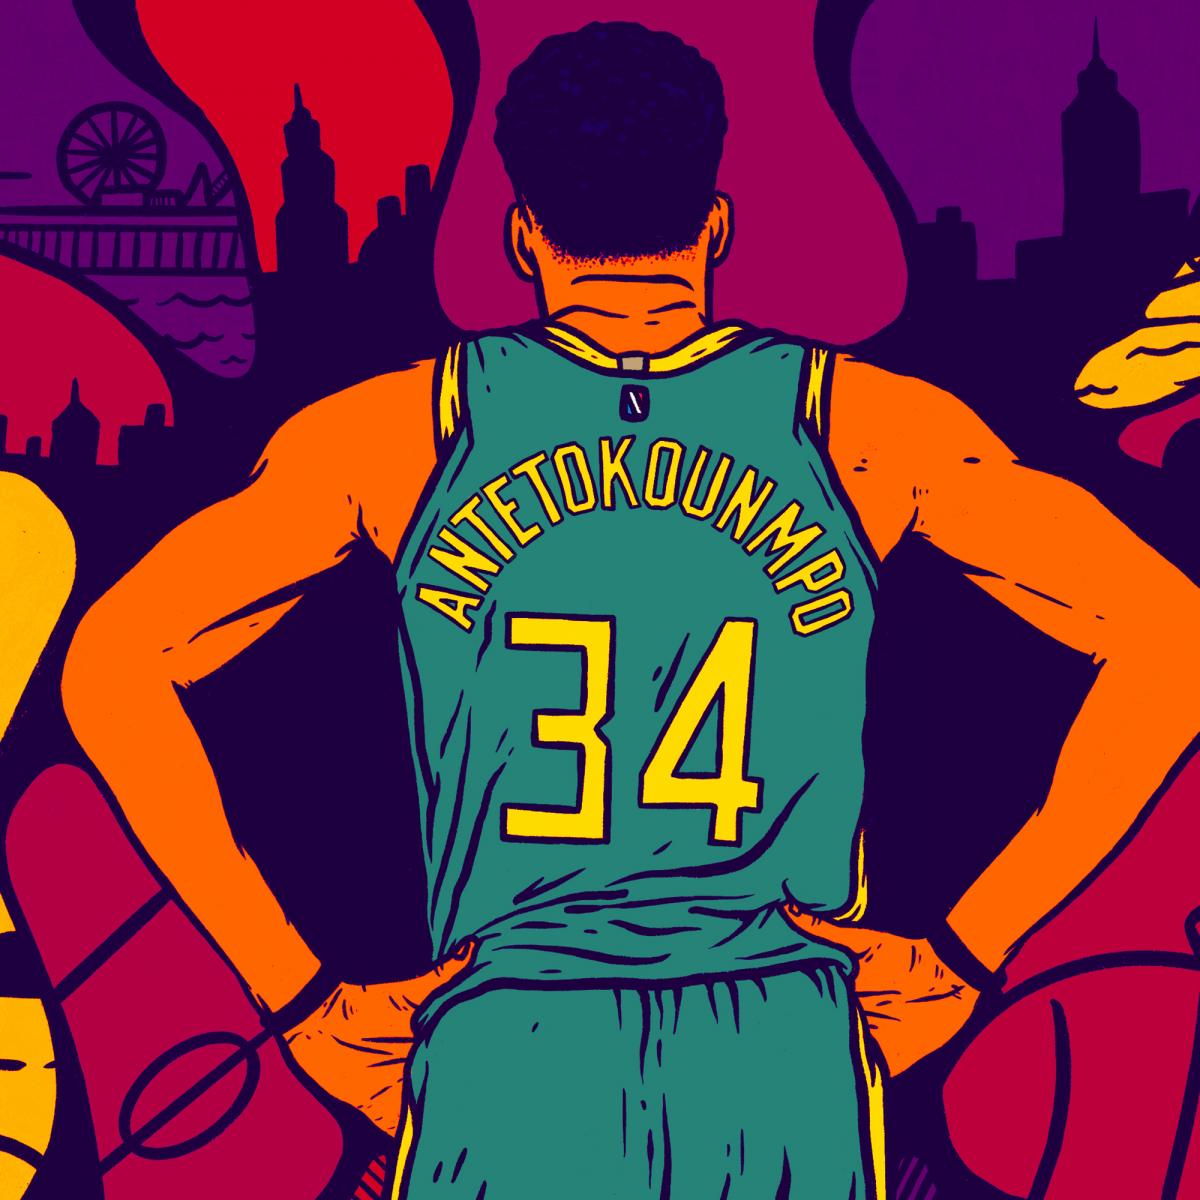 At long last, the Bucks are bringing back the purple uniforms